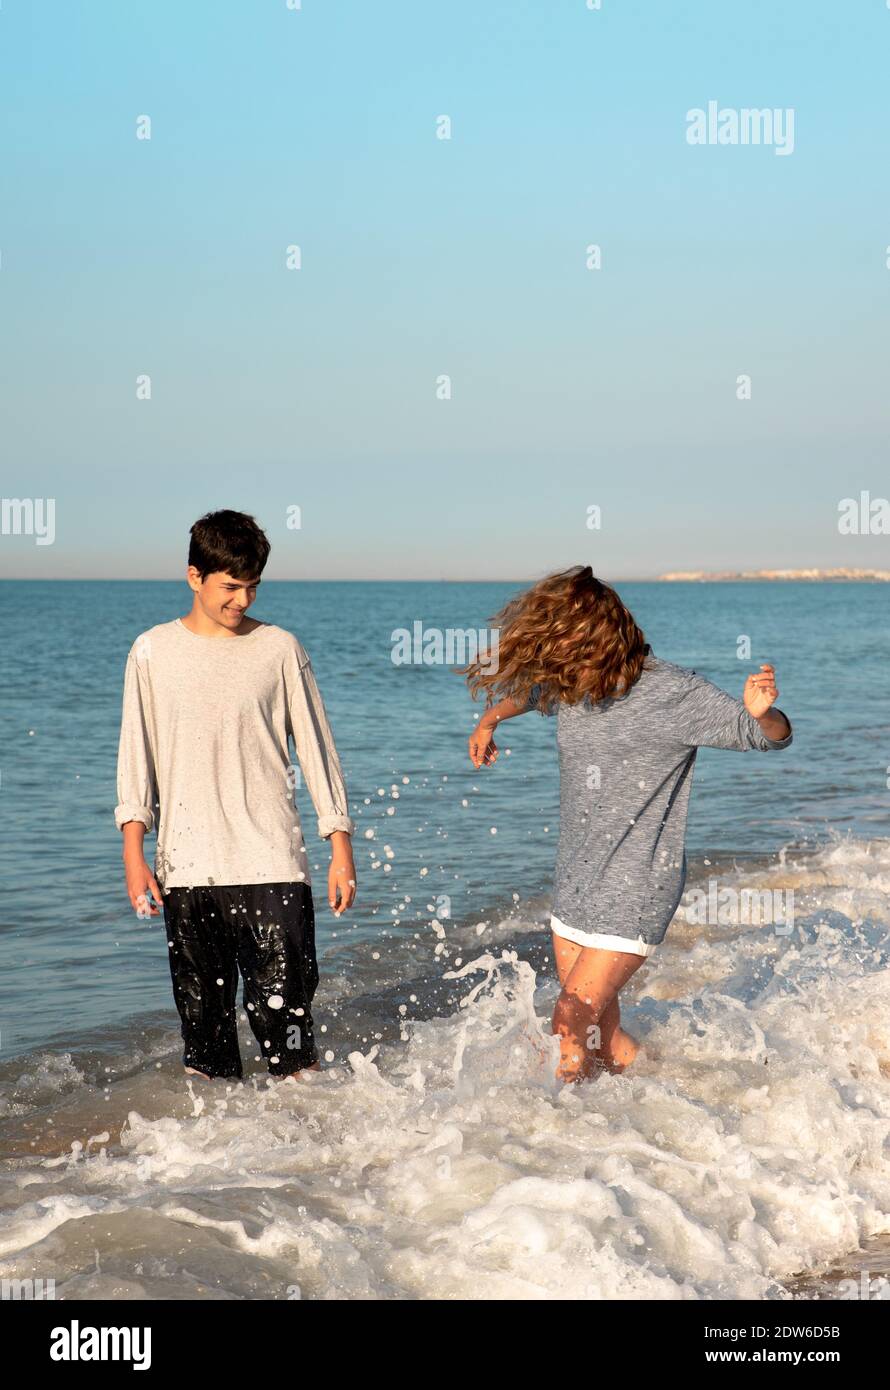 Woman playing with her son on the beach Stock Photo